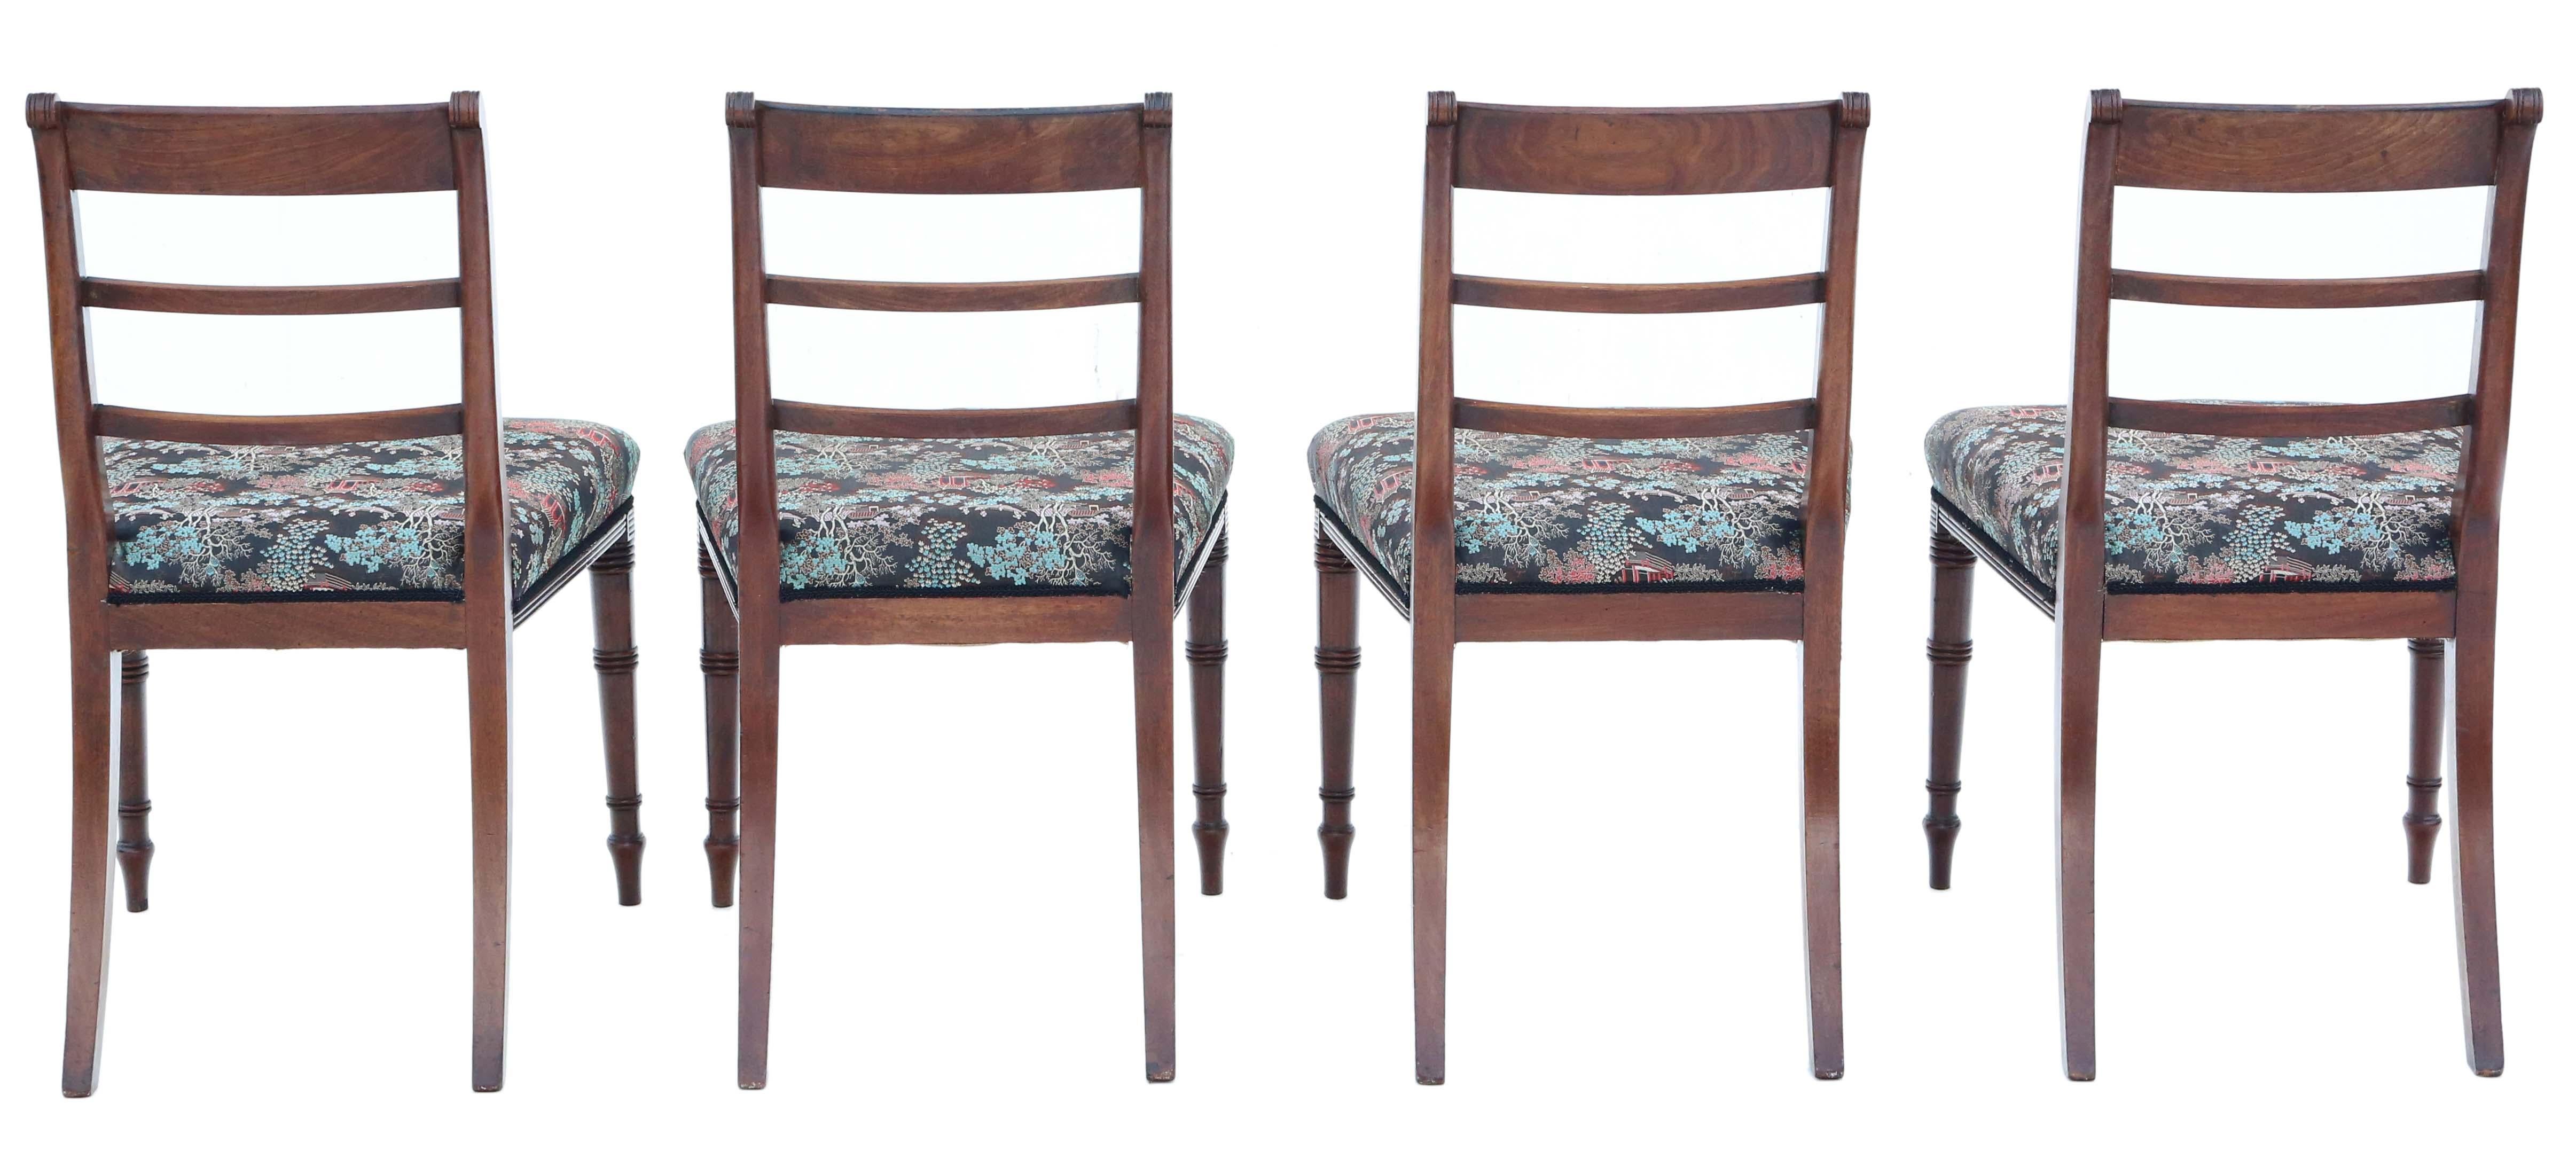 Antique quality set of 4 Georgian mahogany dining chairs C1800 Chinoiserie In Good Condition For Sale In Wisbech, Cambridgeshire